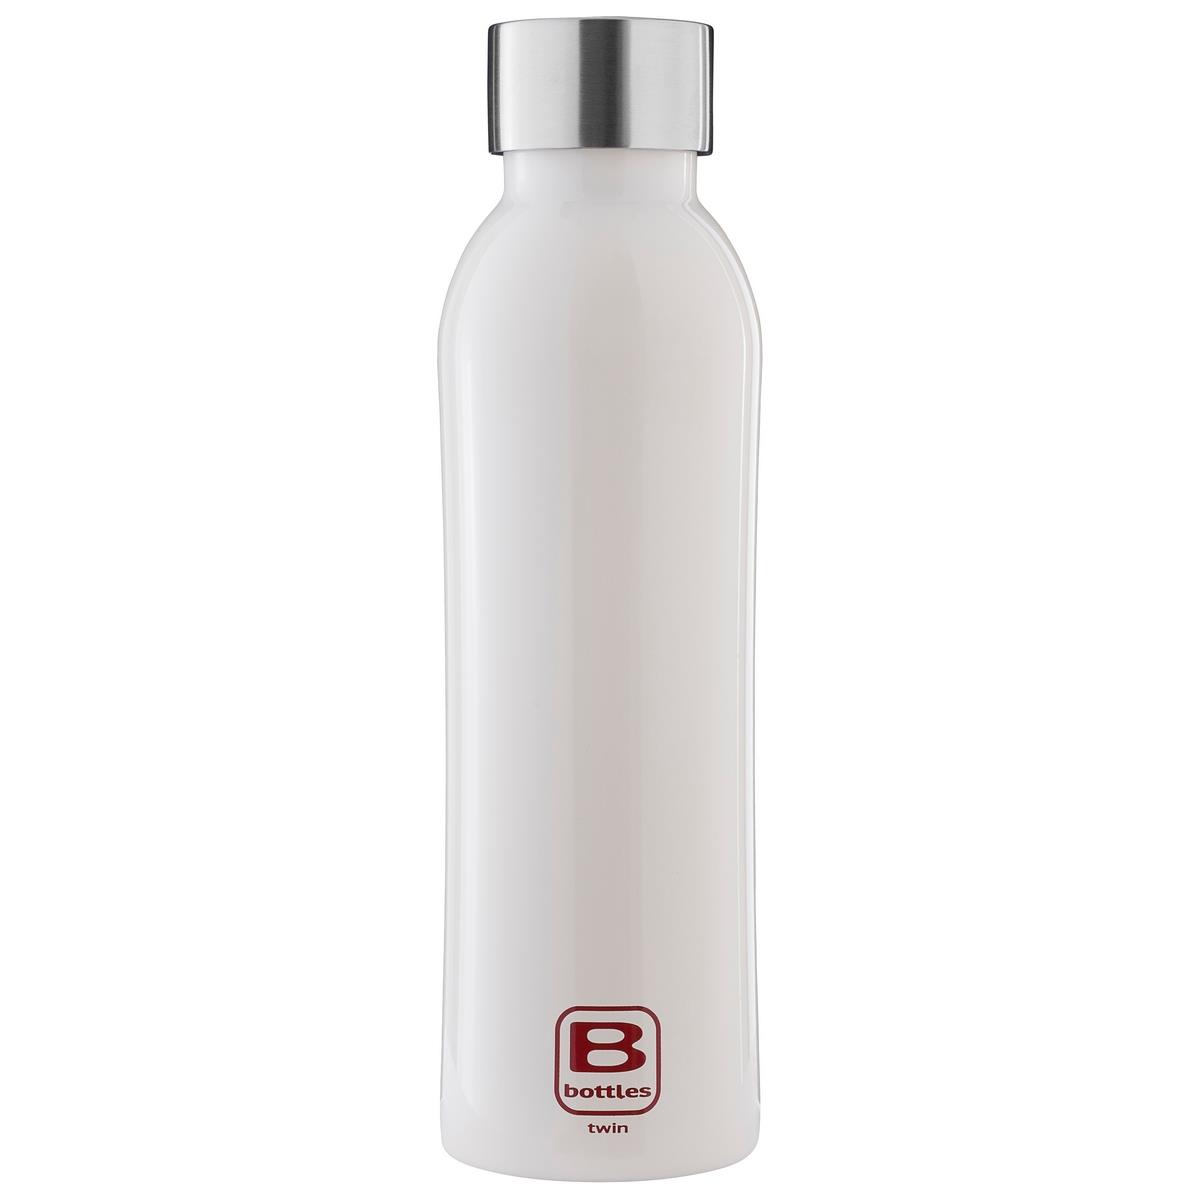 photo B Bottles Twin - Bright White - 500 ml - Double wall thermal bottle in 18/10 stainless steel